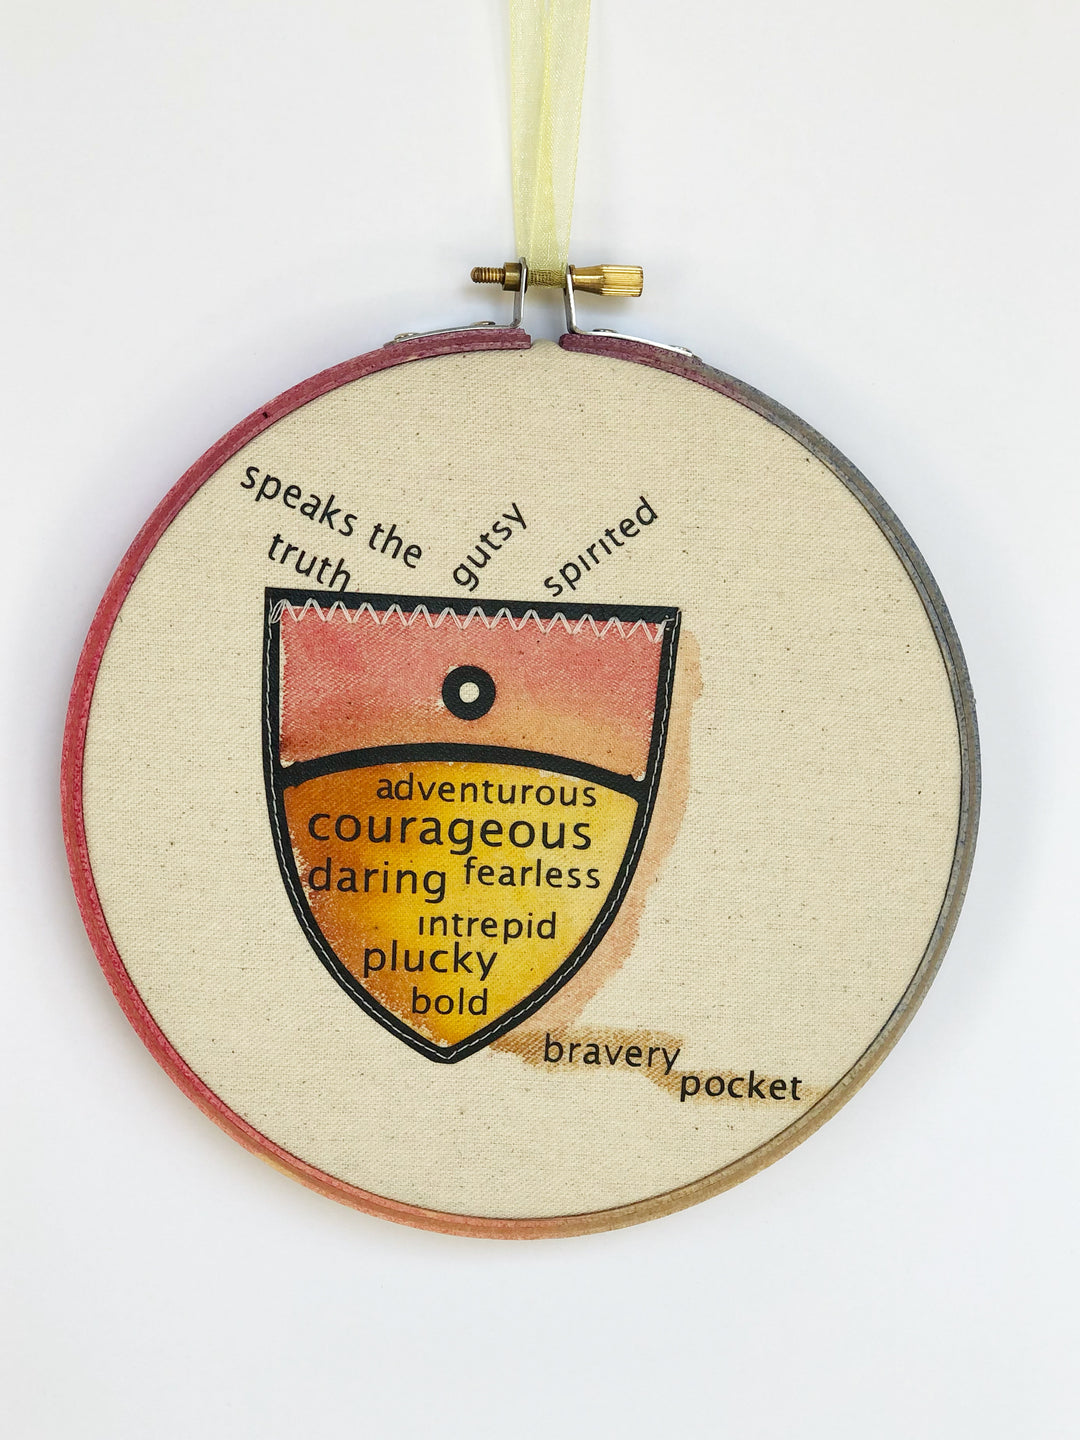 round painted wooden hoop with canvas and a painted pocket shape, filled with words about bravery, such as speaks the truth, gutsy, spirited, adventurous, courageous, fearless, daring, intrepid, plucky and bold